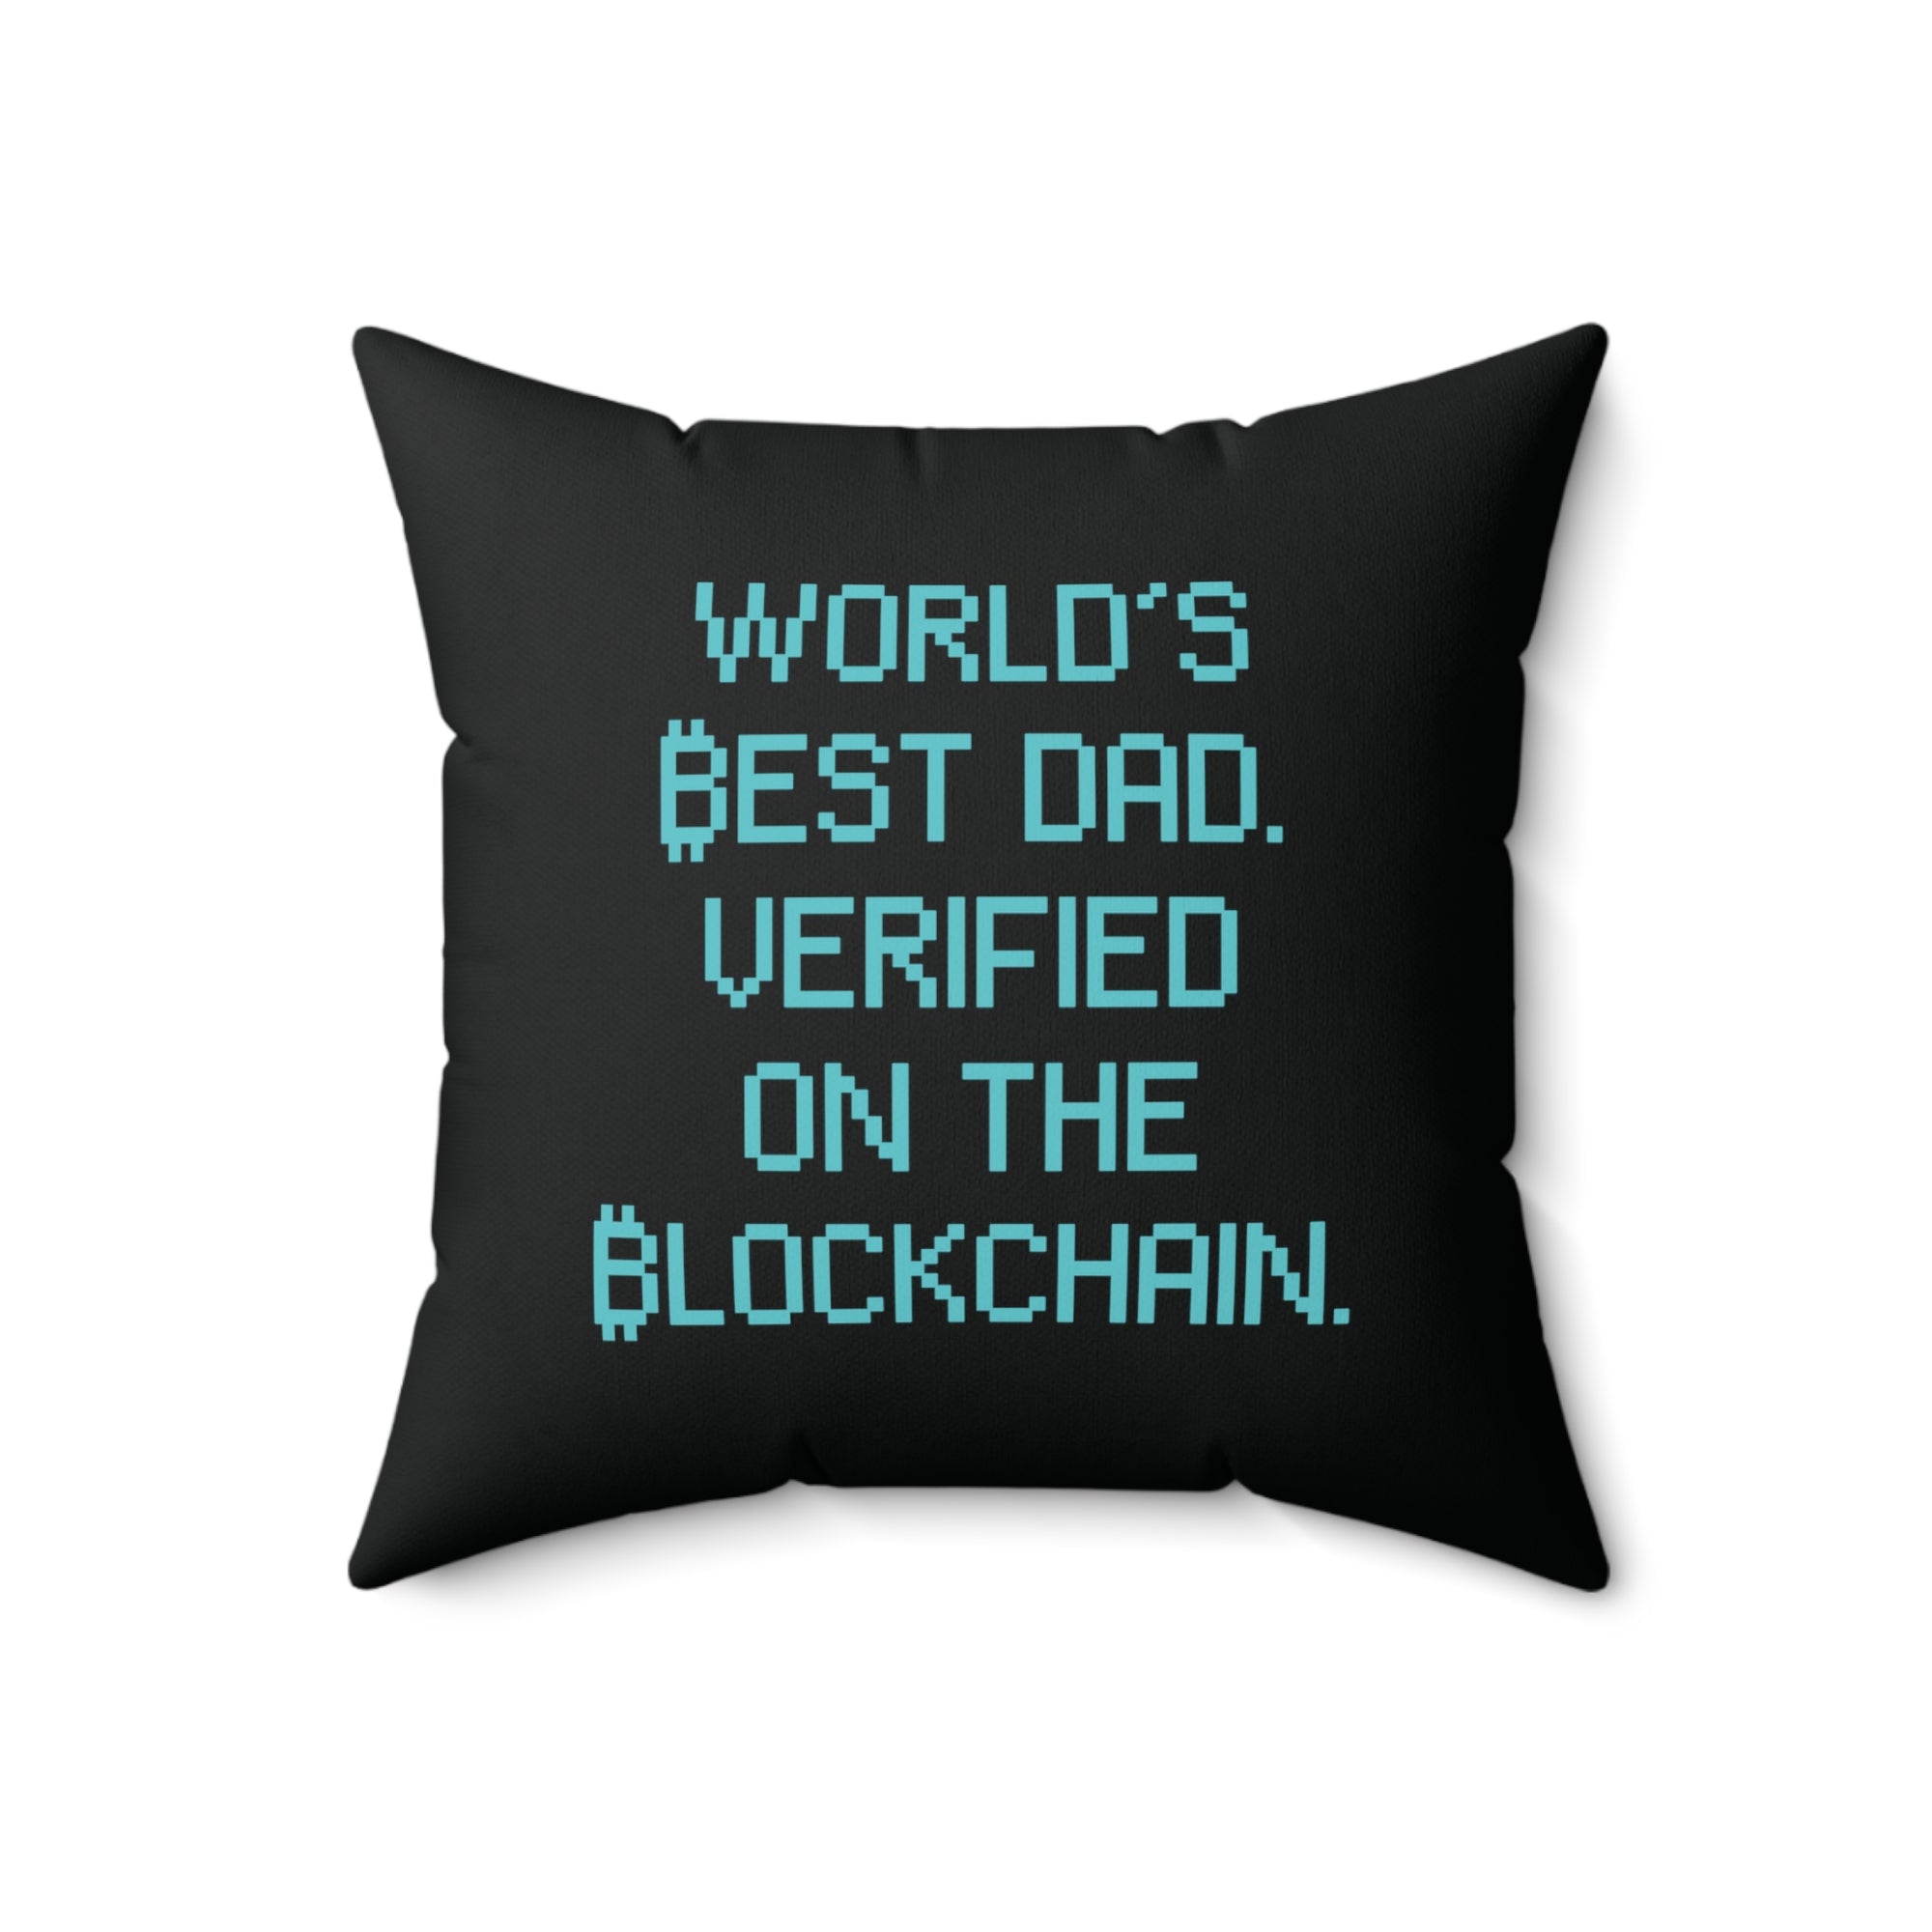 Bitcoin Gift: World's Best Dad - Verified on the Blockchain Pillow. Available at NEONCRYPTO STORE.